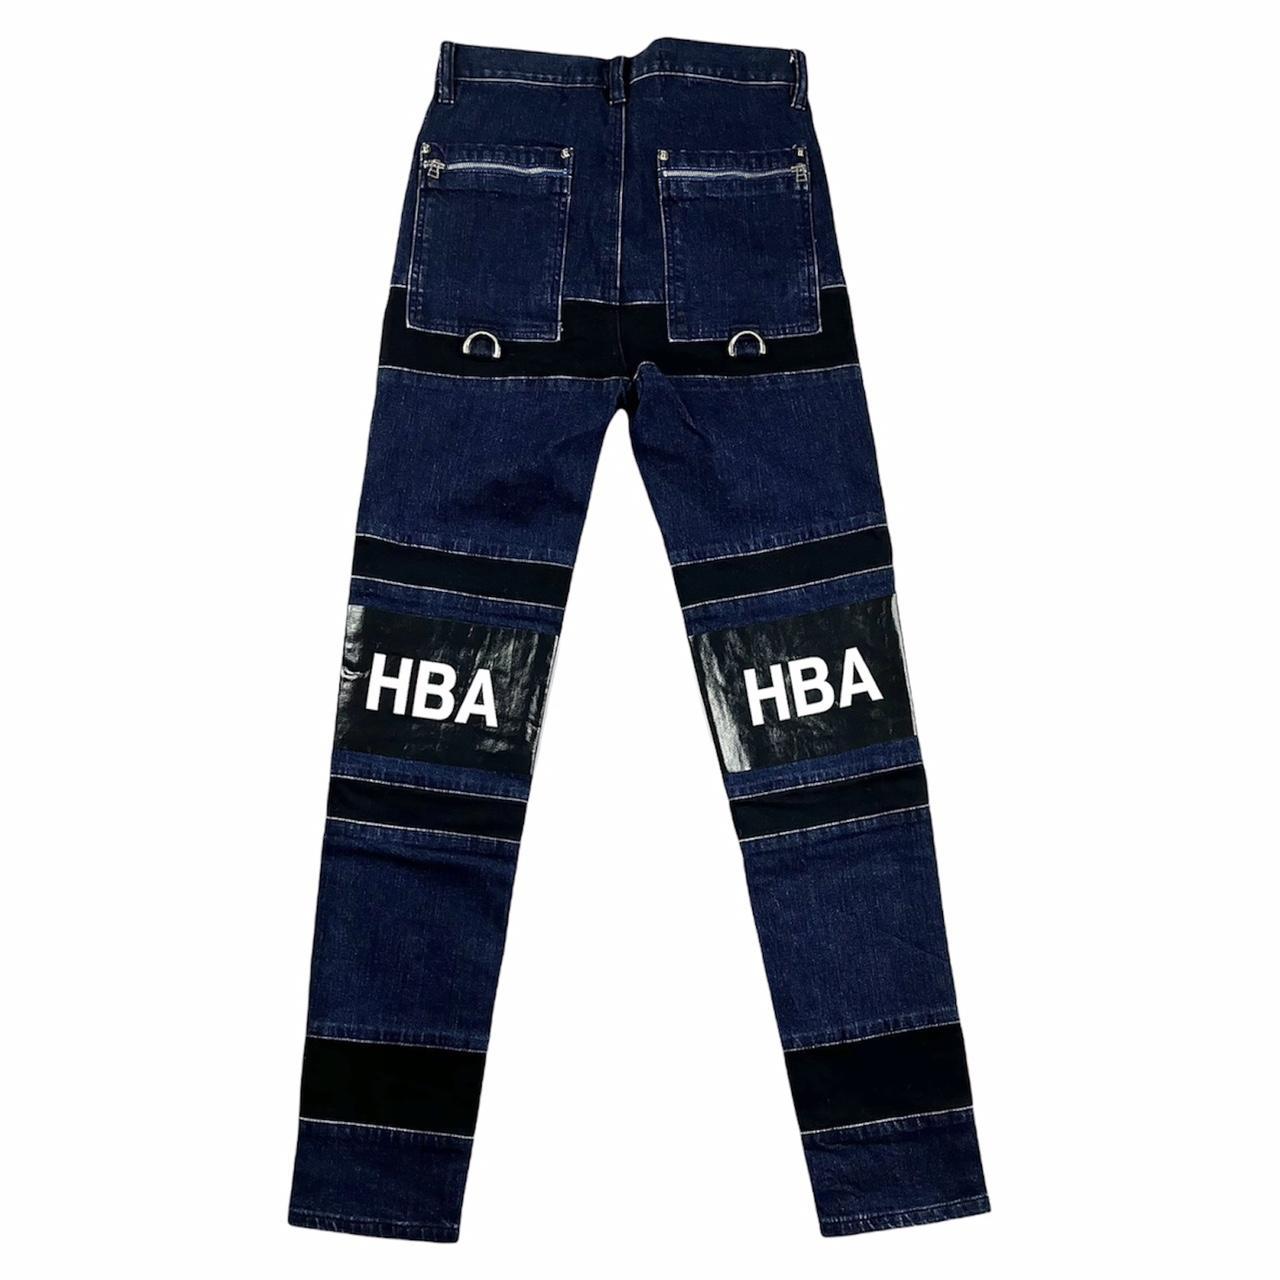 Hood By Air Men's Black and Blue Jeans (2)